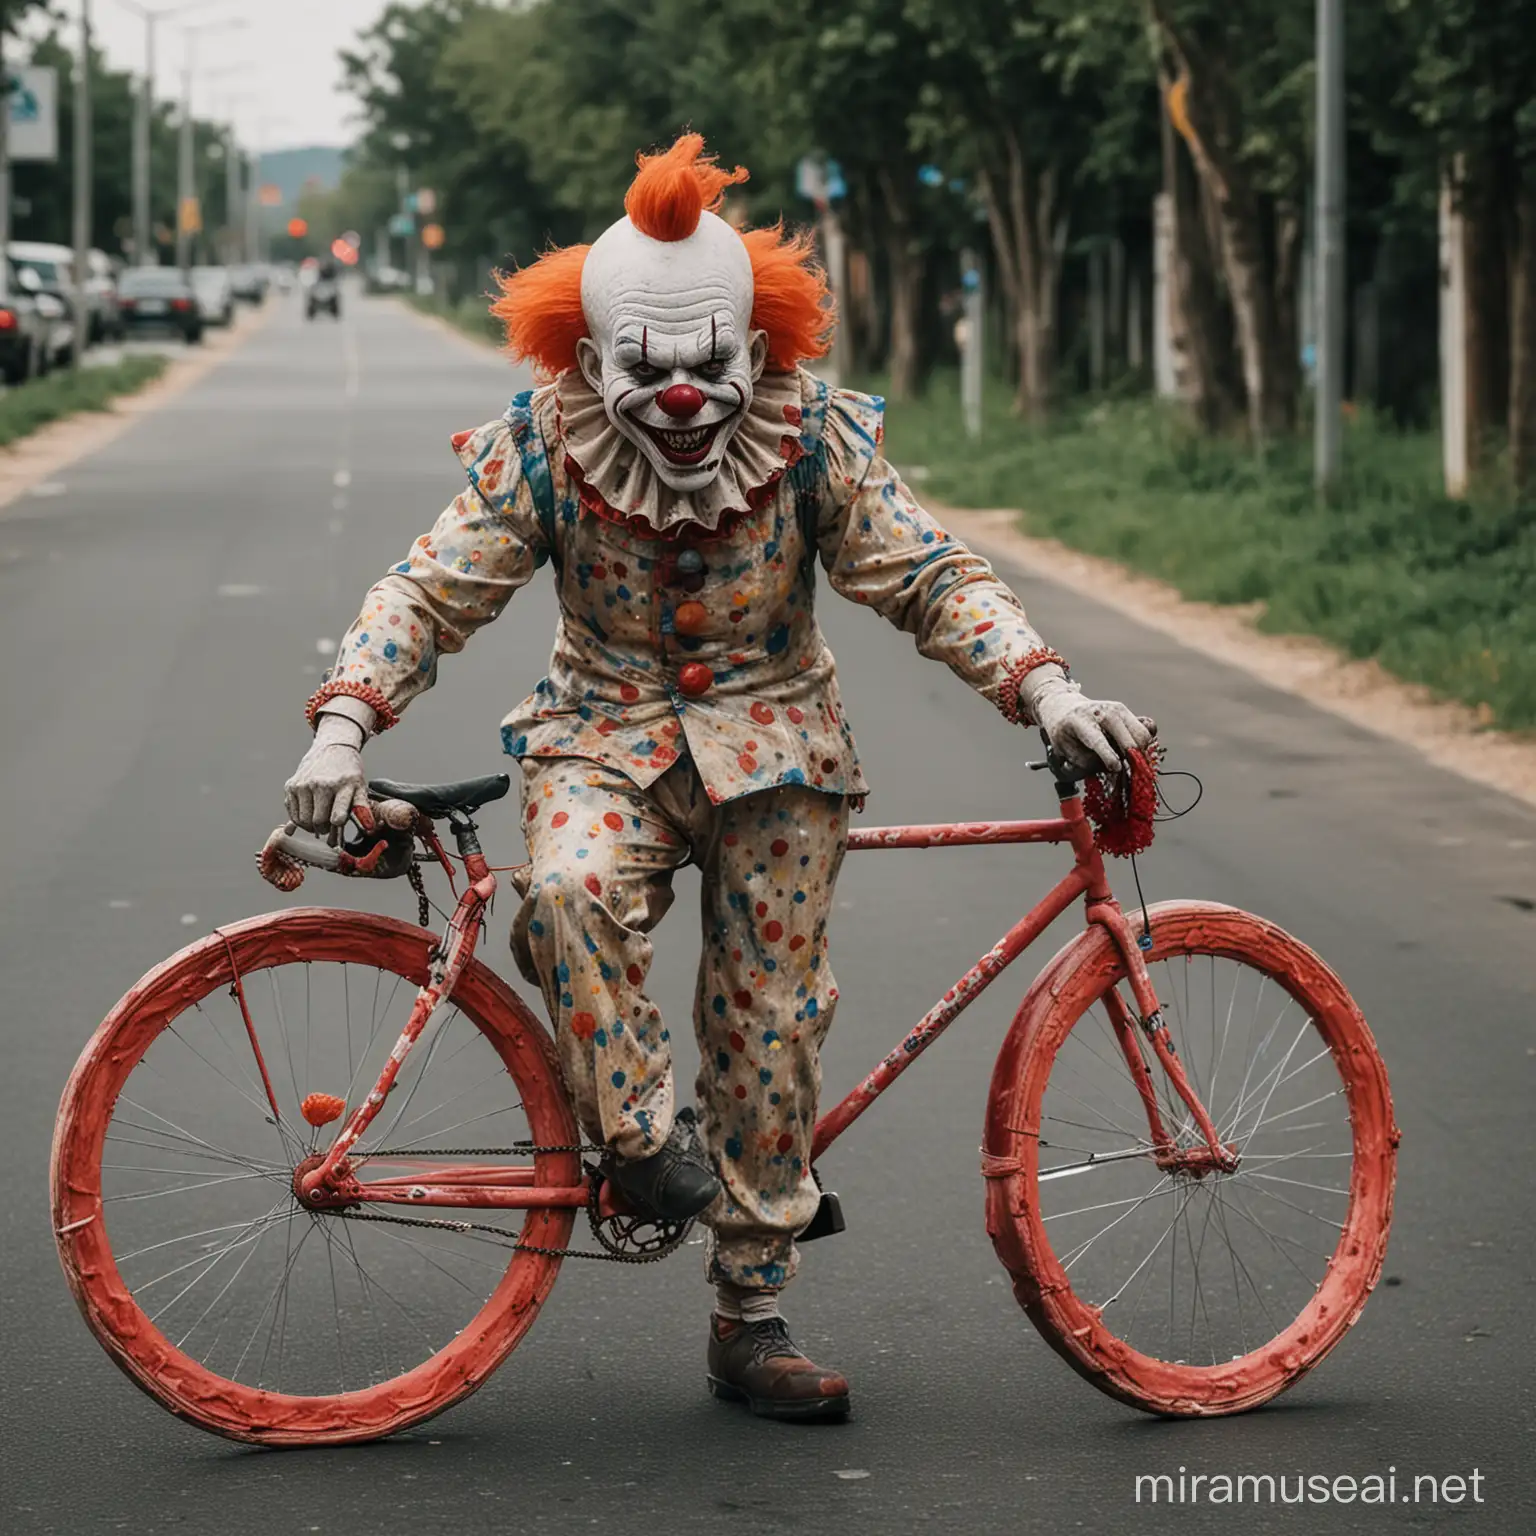 Bicycle made of susage with Bad clown from IT movie riding on it.